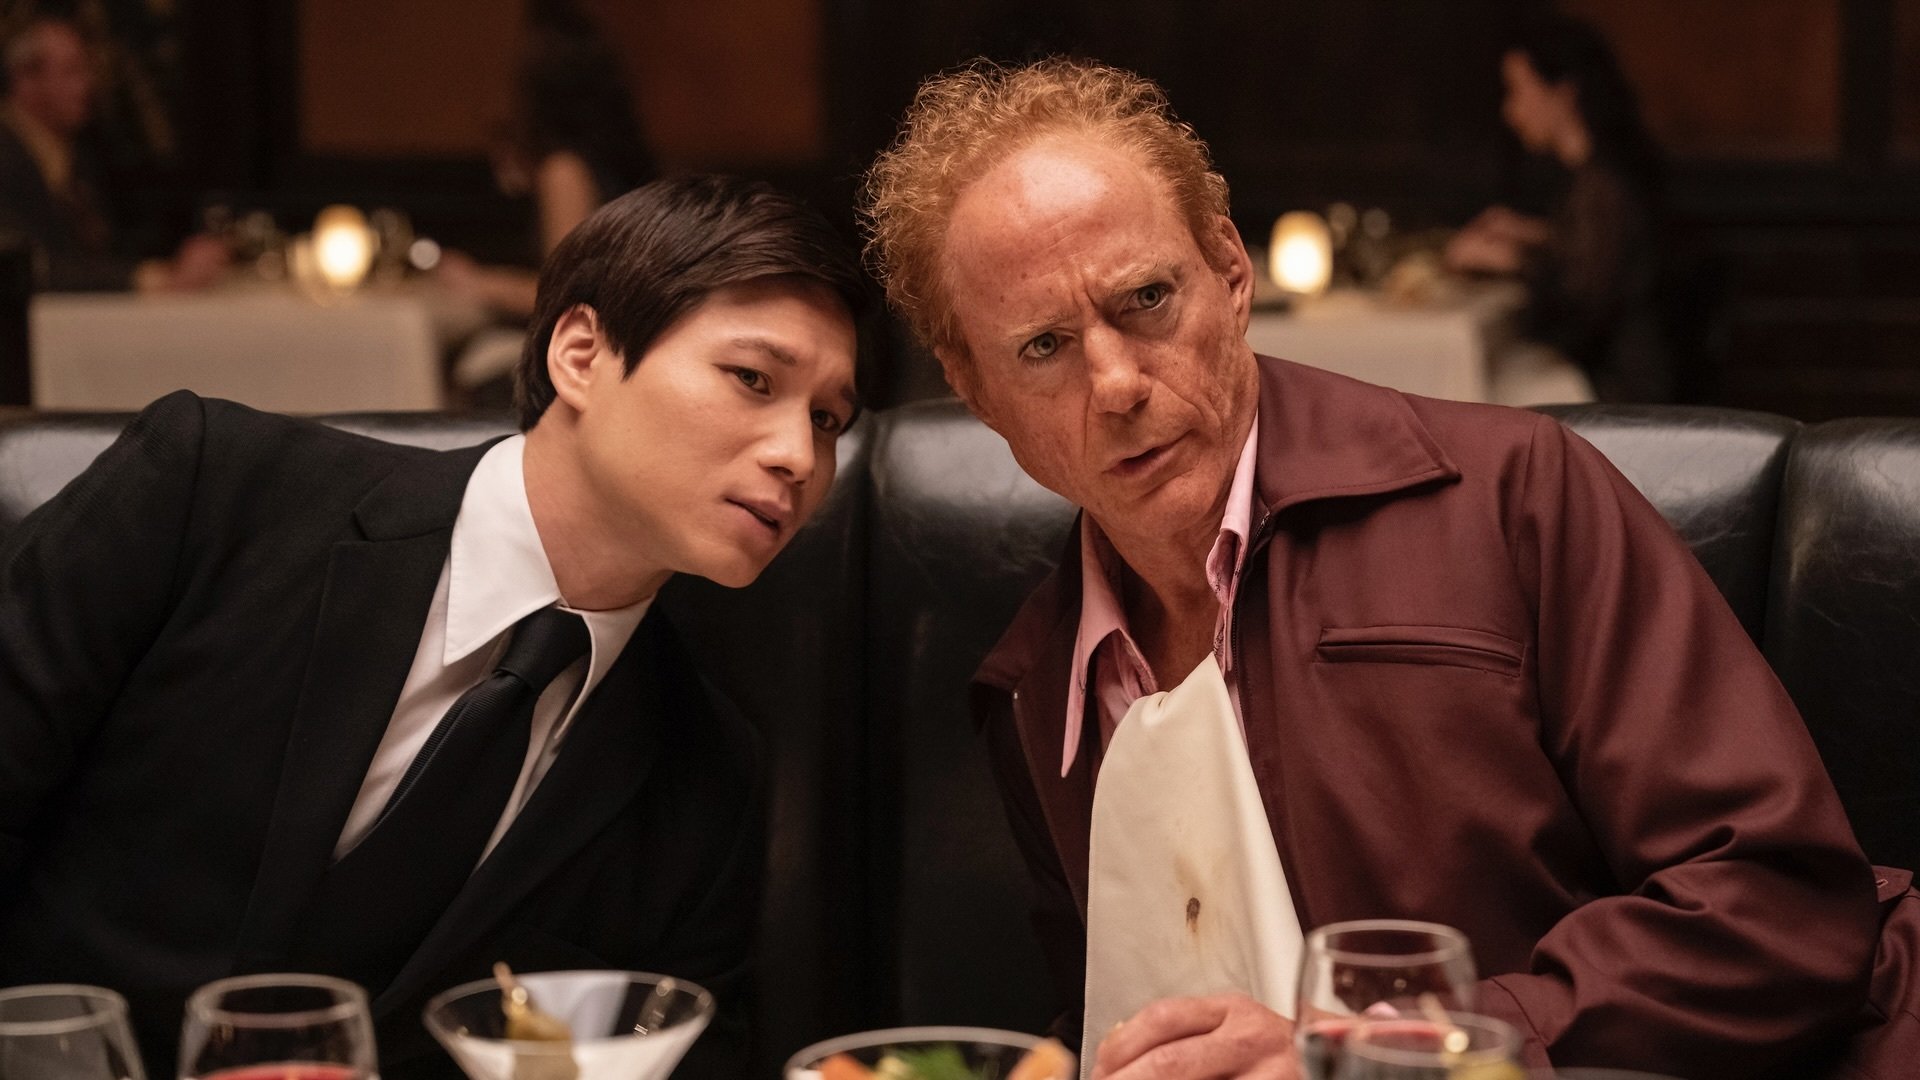 Two men lean together to discuss something while eating at a steakhouse.